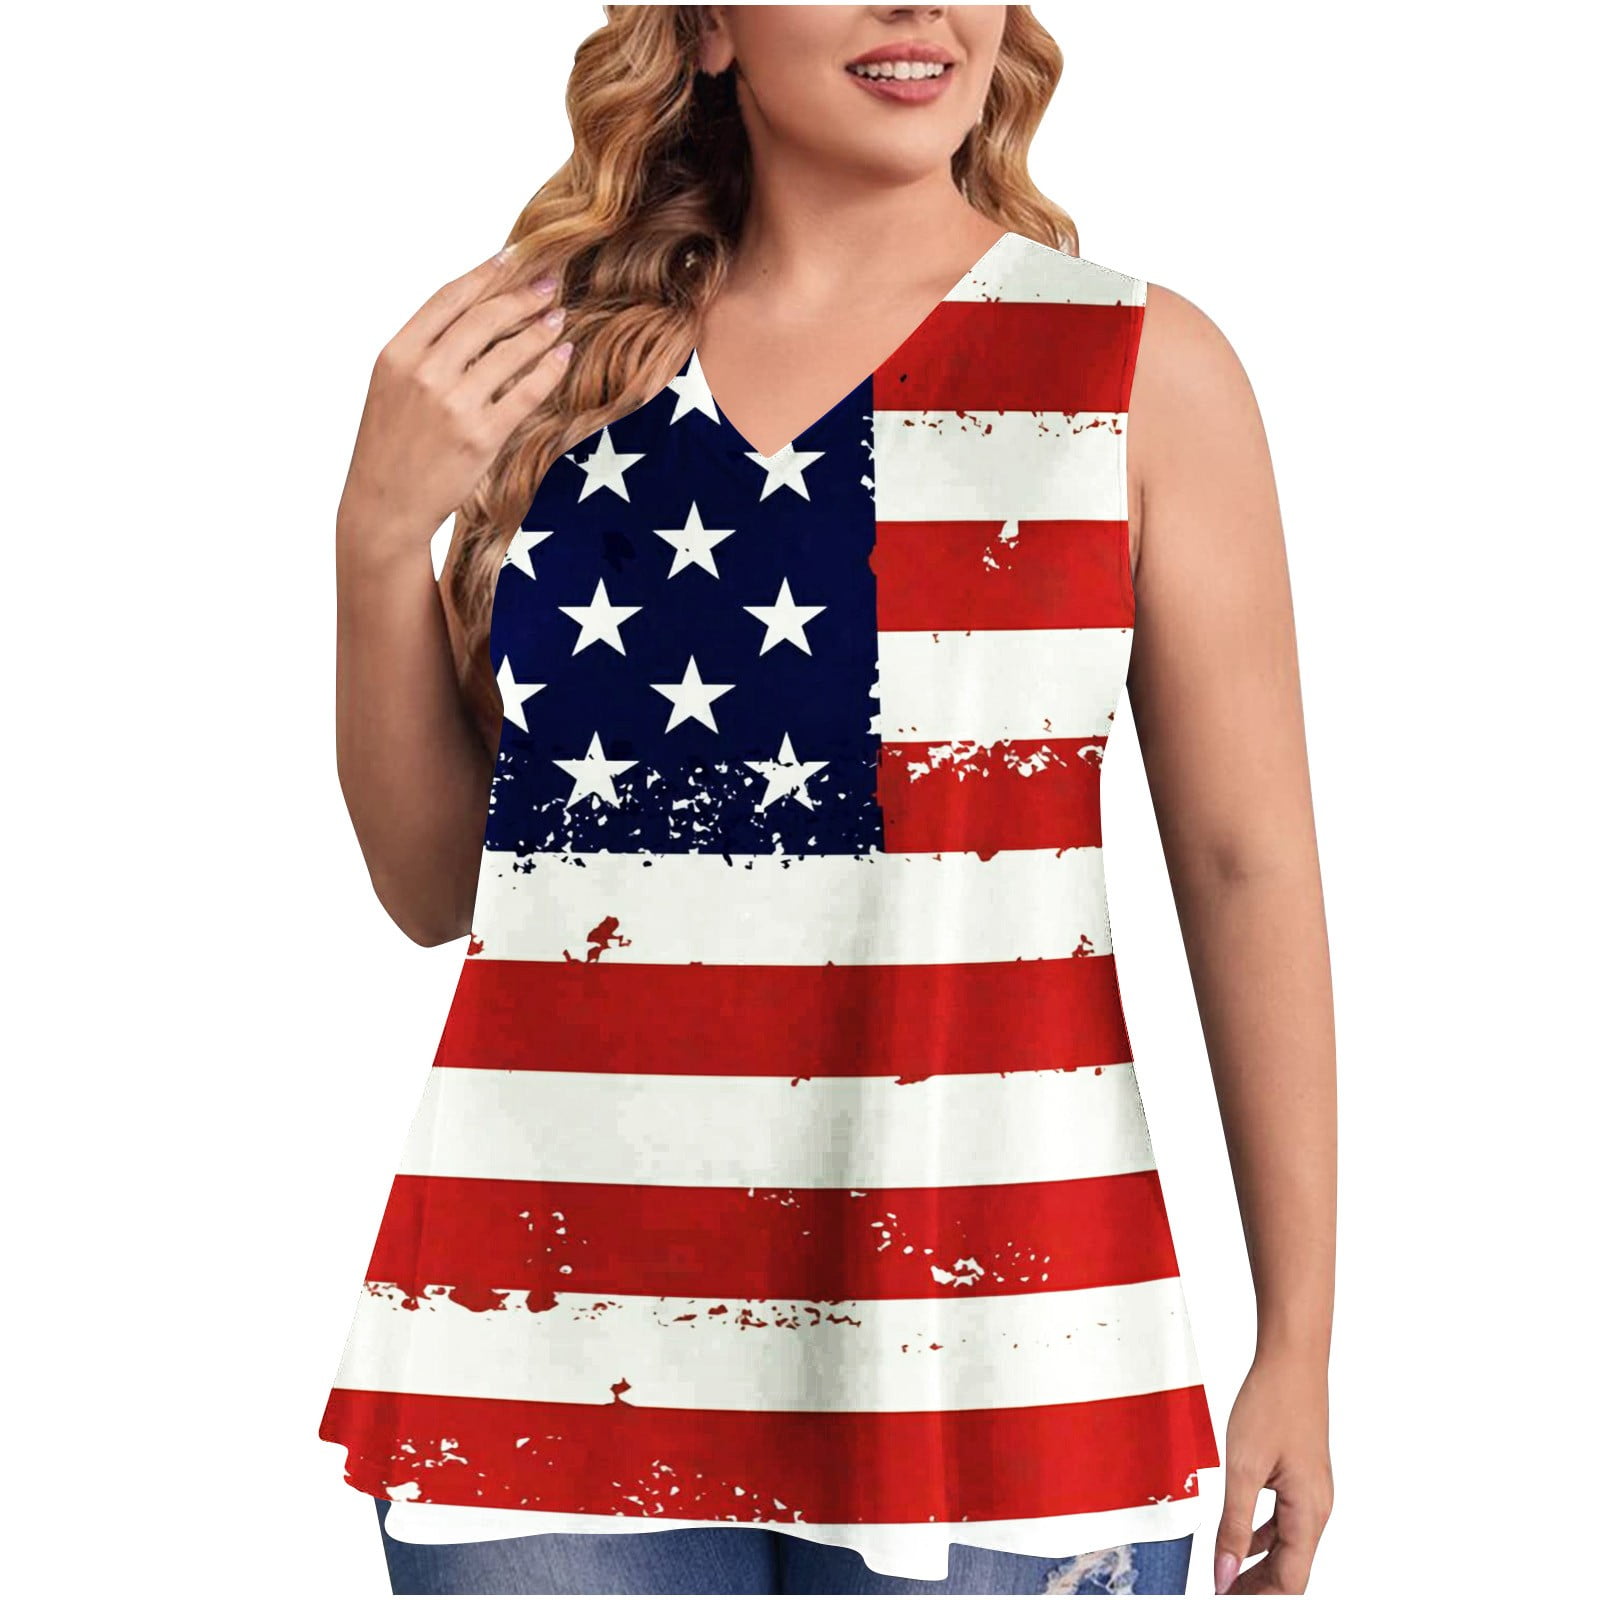 pbnbp Plus Size Tops for Women 4th of July American Flag V Neck ...